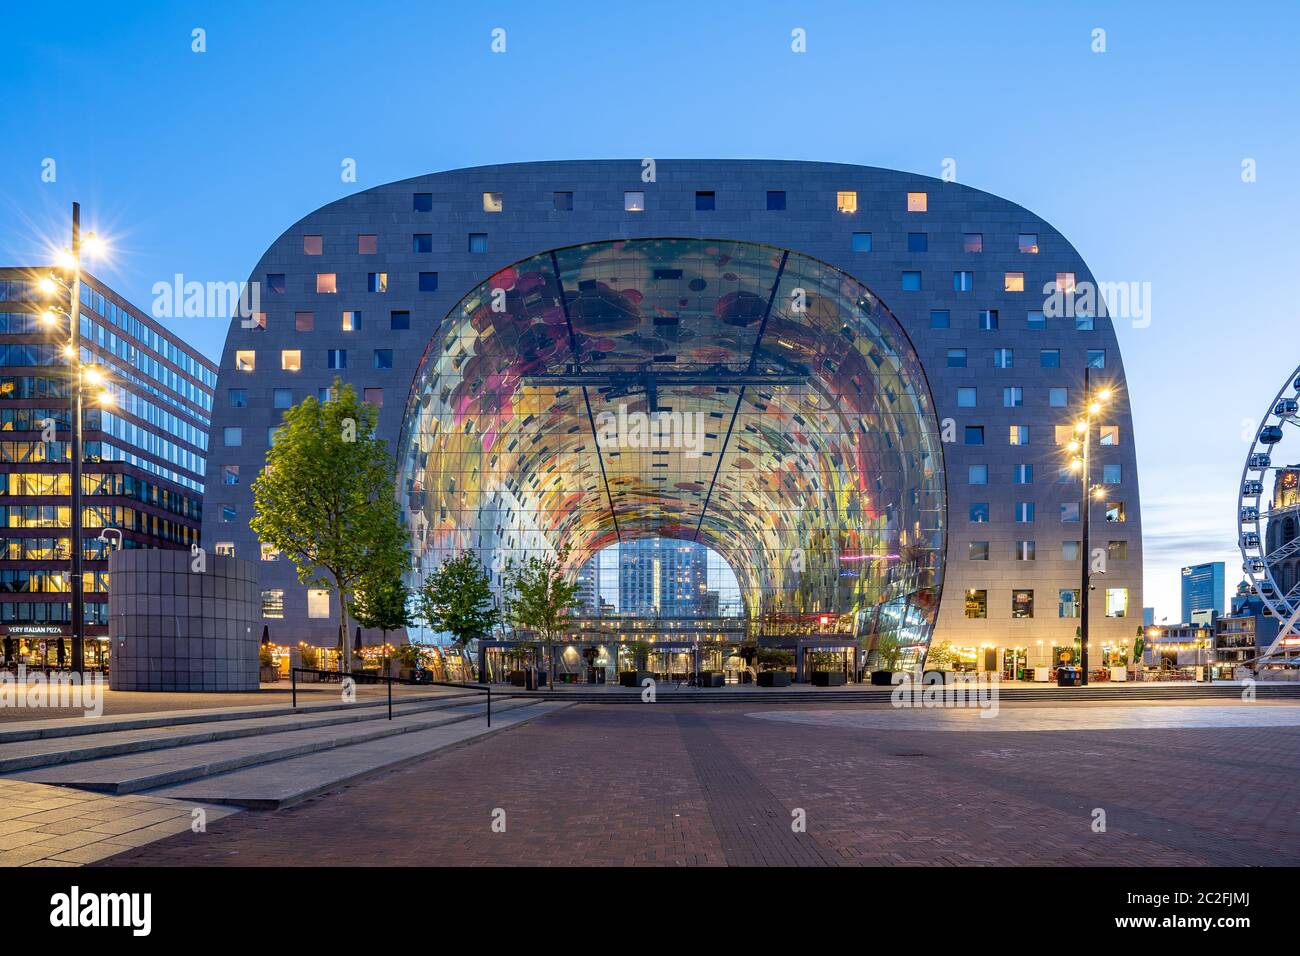 View of Markthal at night in Rotterdam city, Netherlands. Stock Photo